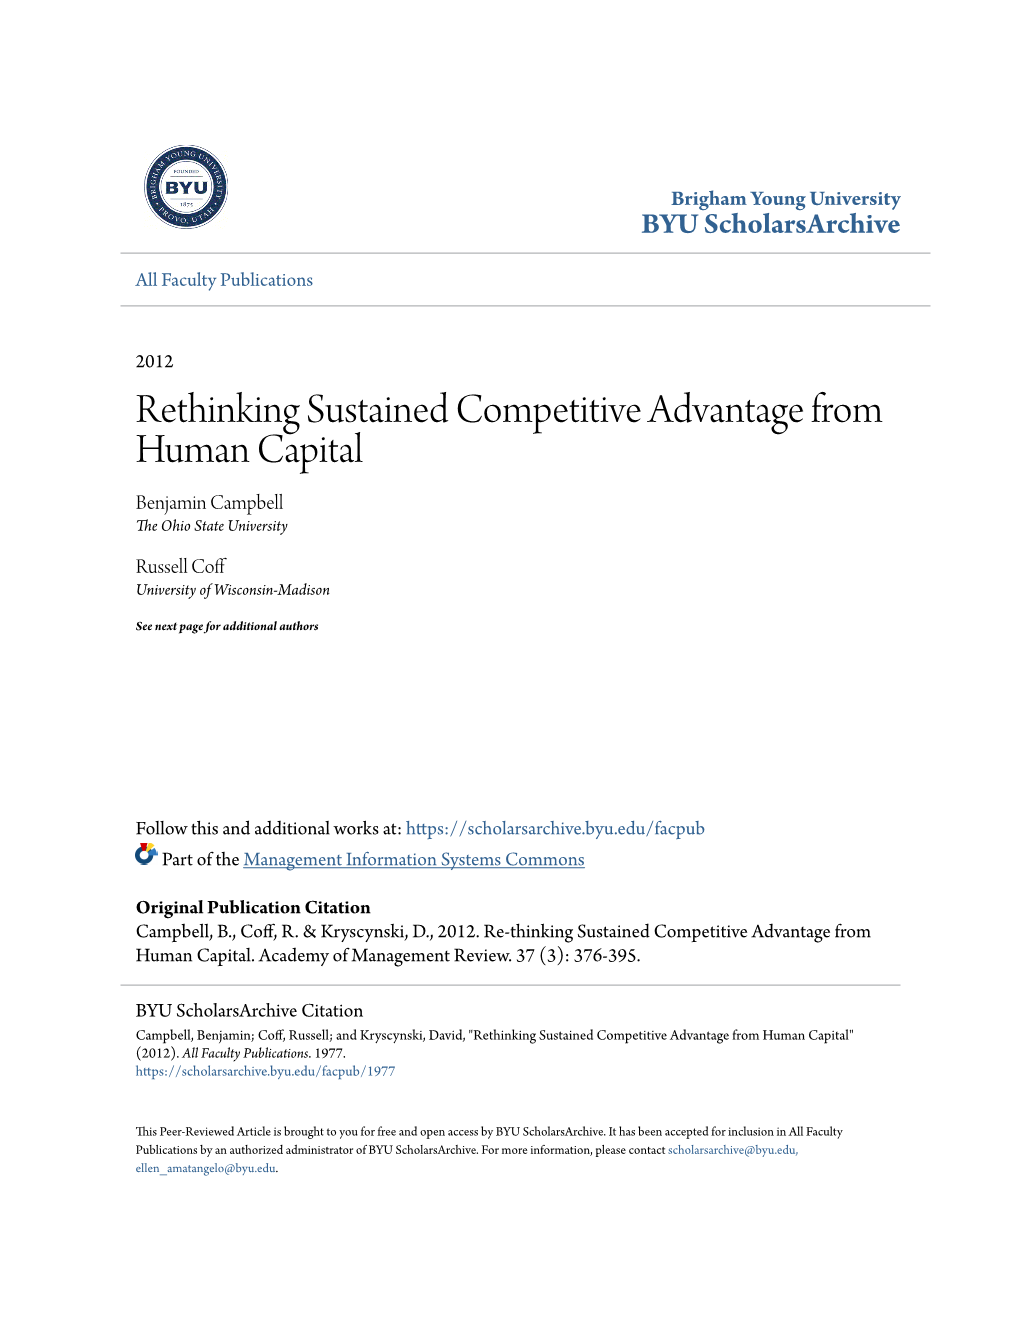 Rethinking Sustained Competitive Advantage from Human Capital Benjamin Campbell the Ohio State University